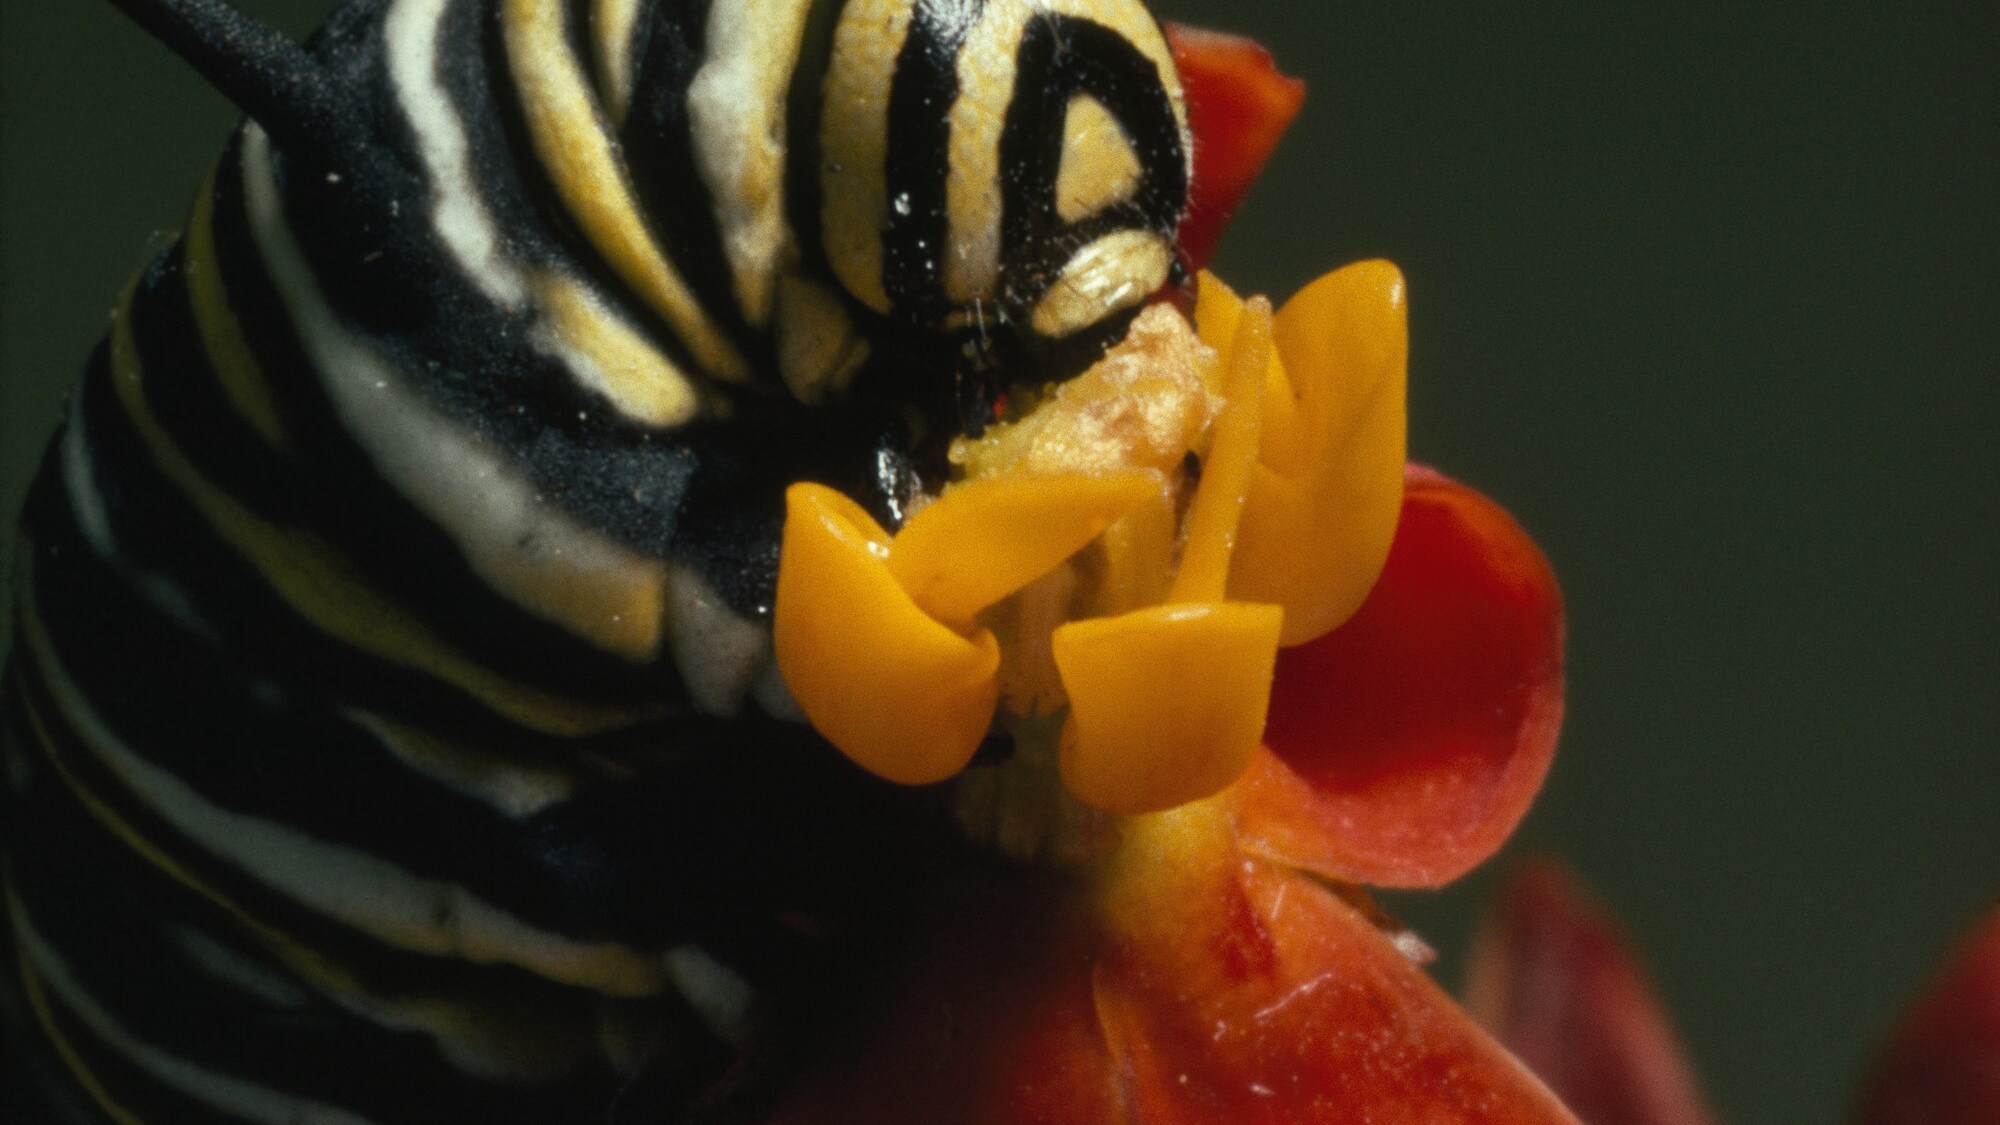 A monarch butterfly caterpillar feeds on a milkweed plant. (National Geographic Image Collection/Bianca Lavies)